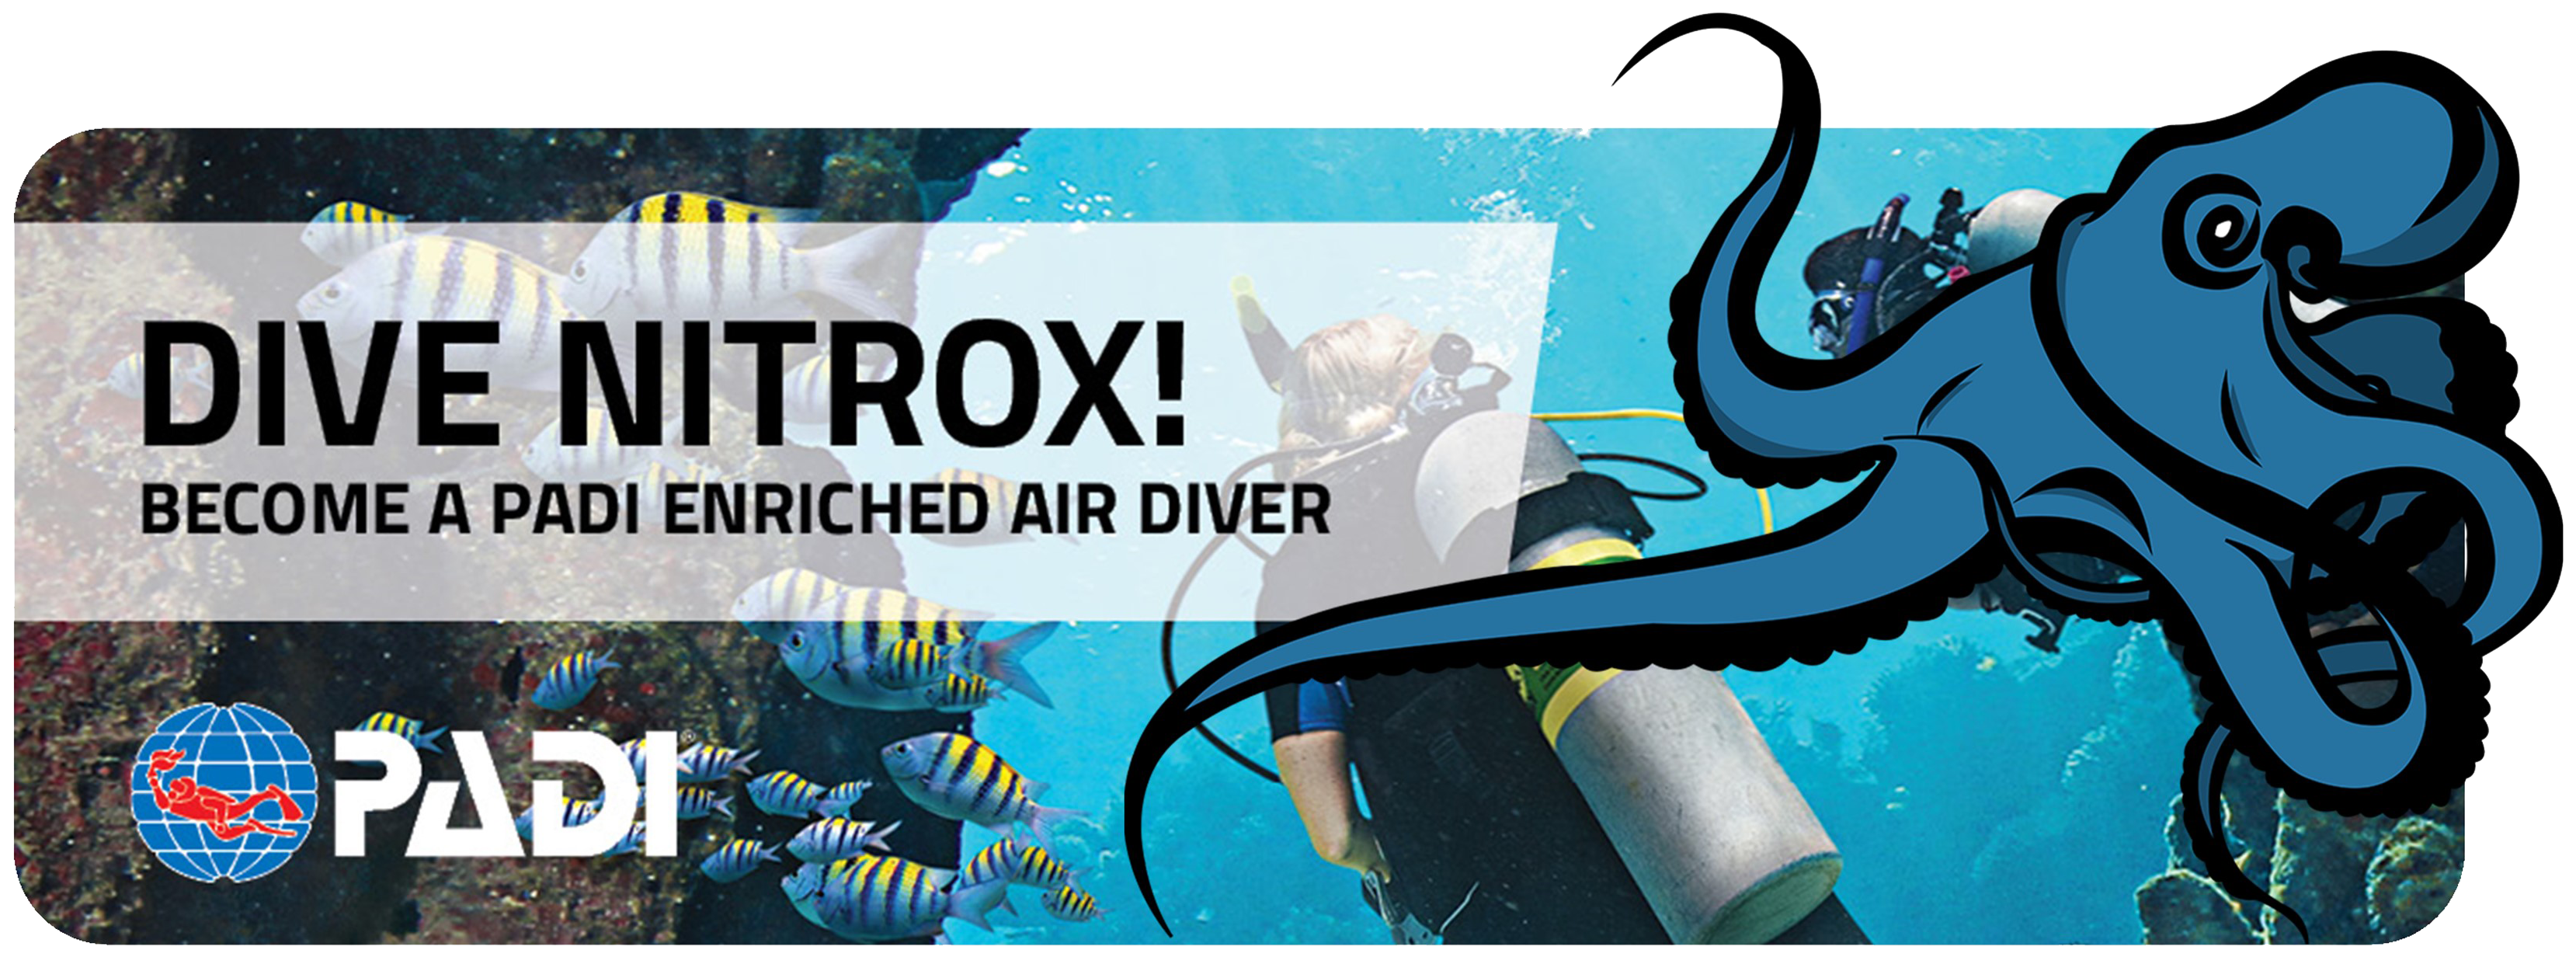 Divers using enriched air